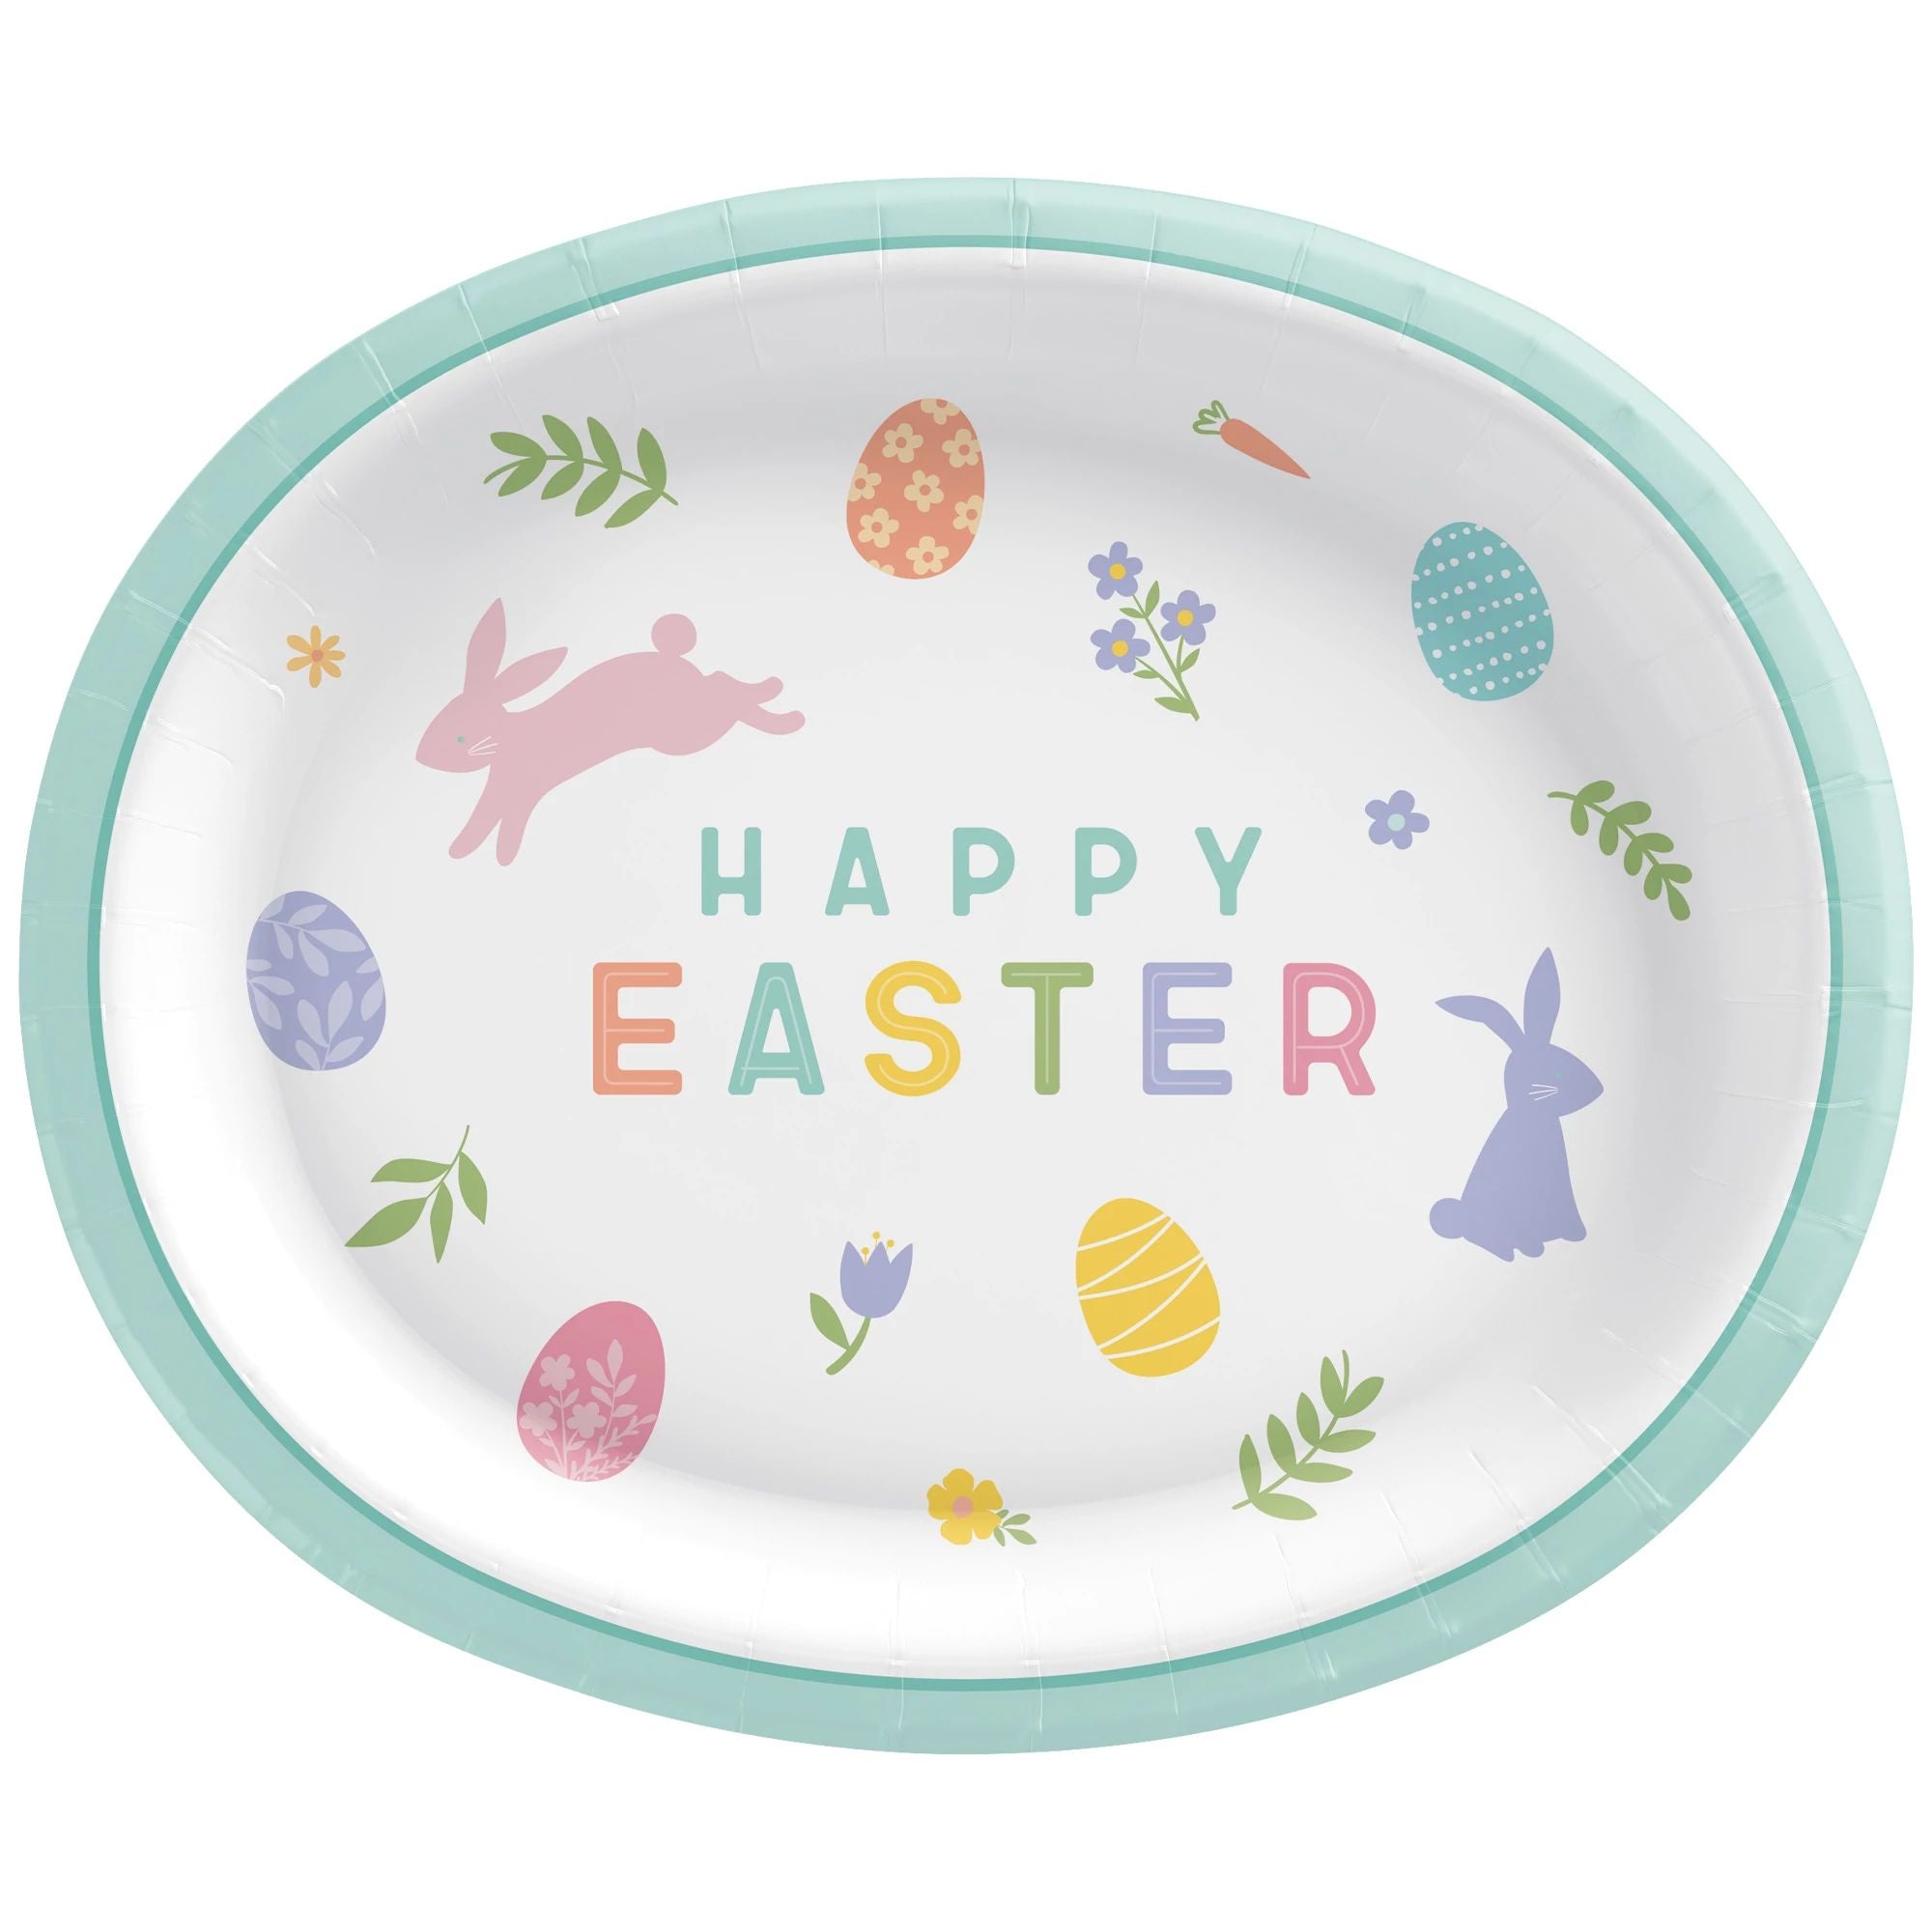 Easter Wishes 10" x 12" Oval Plates, 8ct